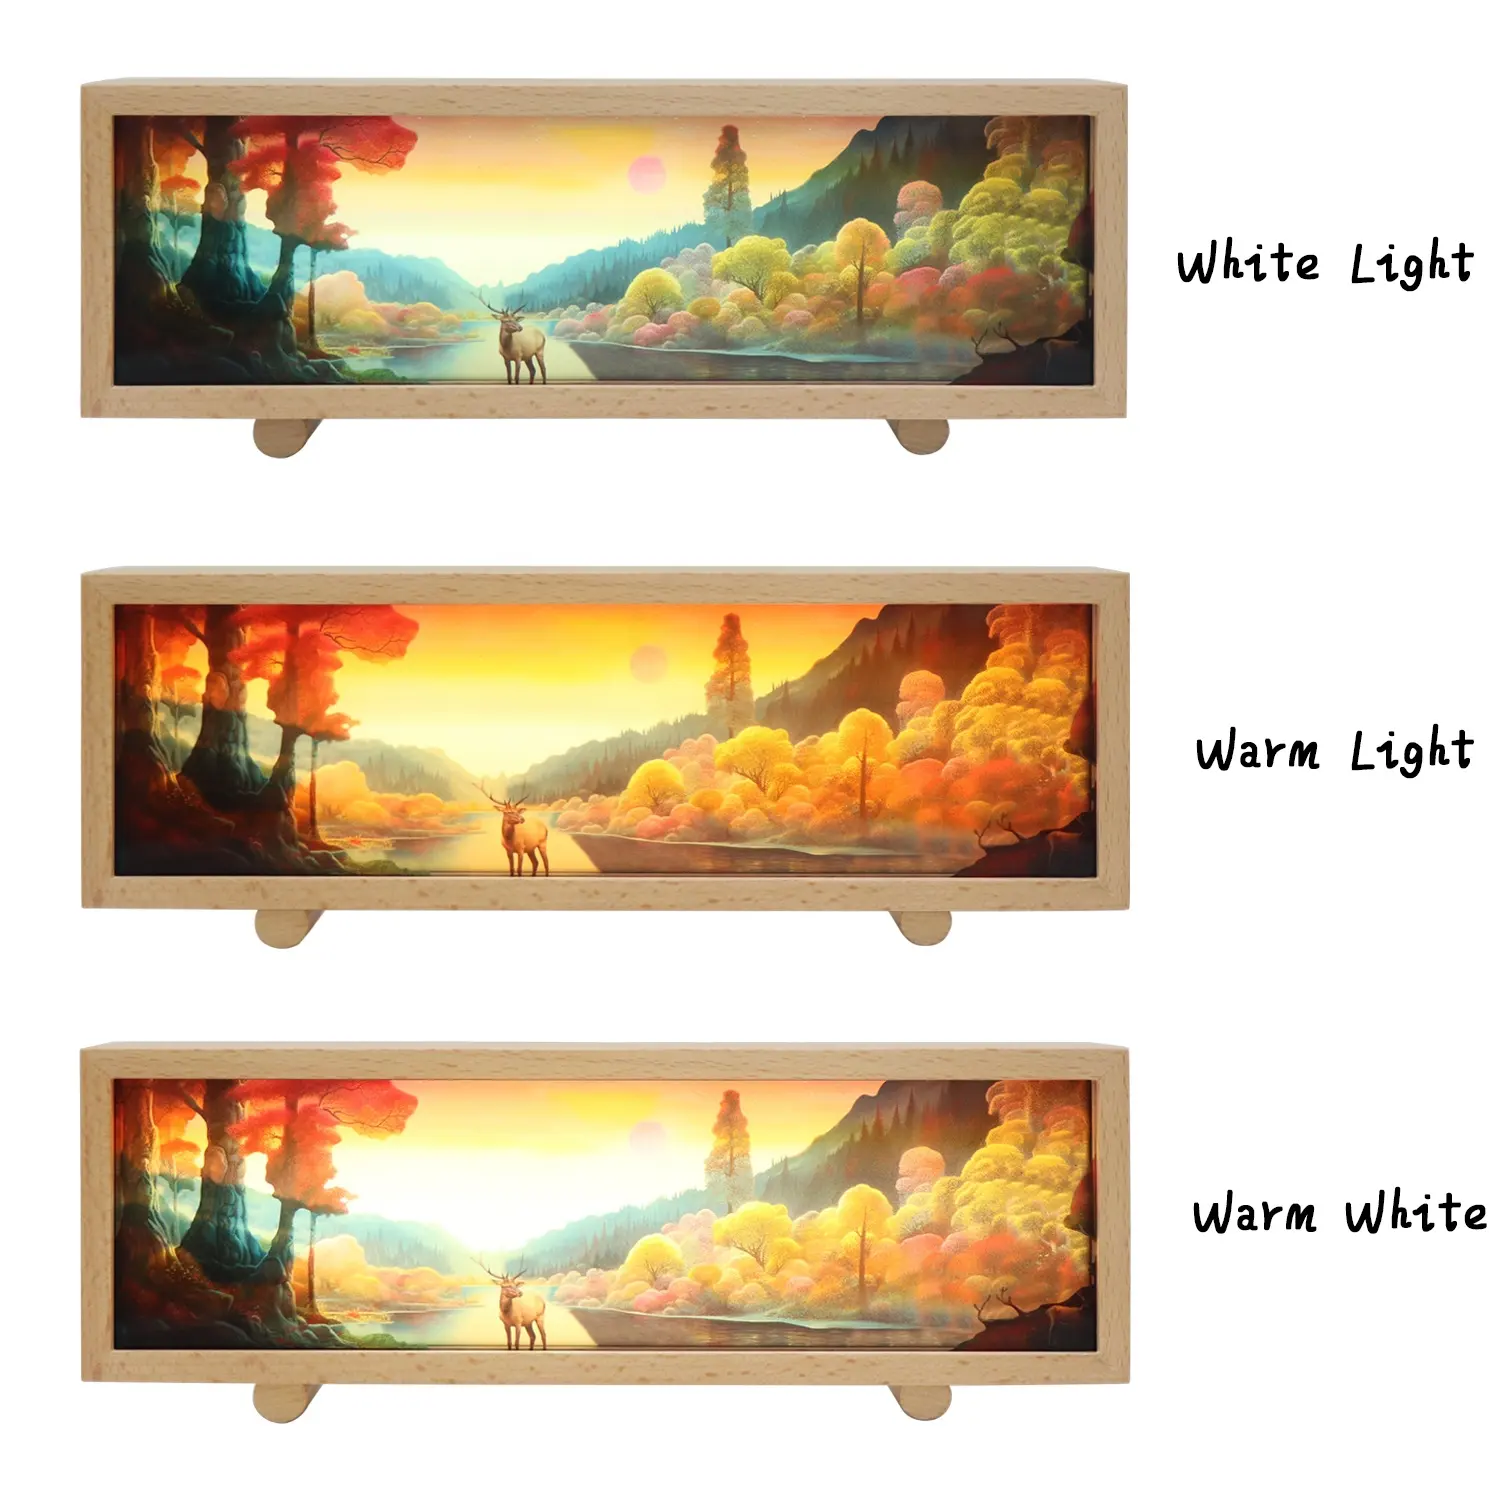 Rechargeable Battery Light Box Anime Wooden Night Lamp Decorative 3 Color Acrylic Light Box For Bedroom